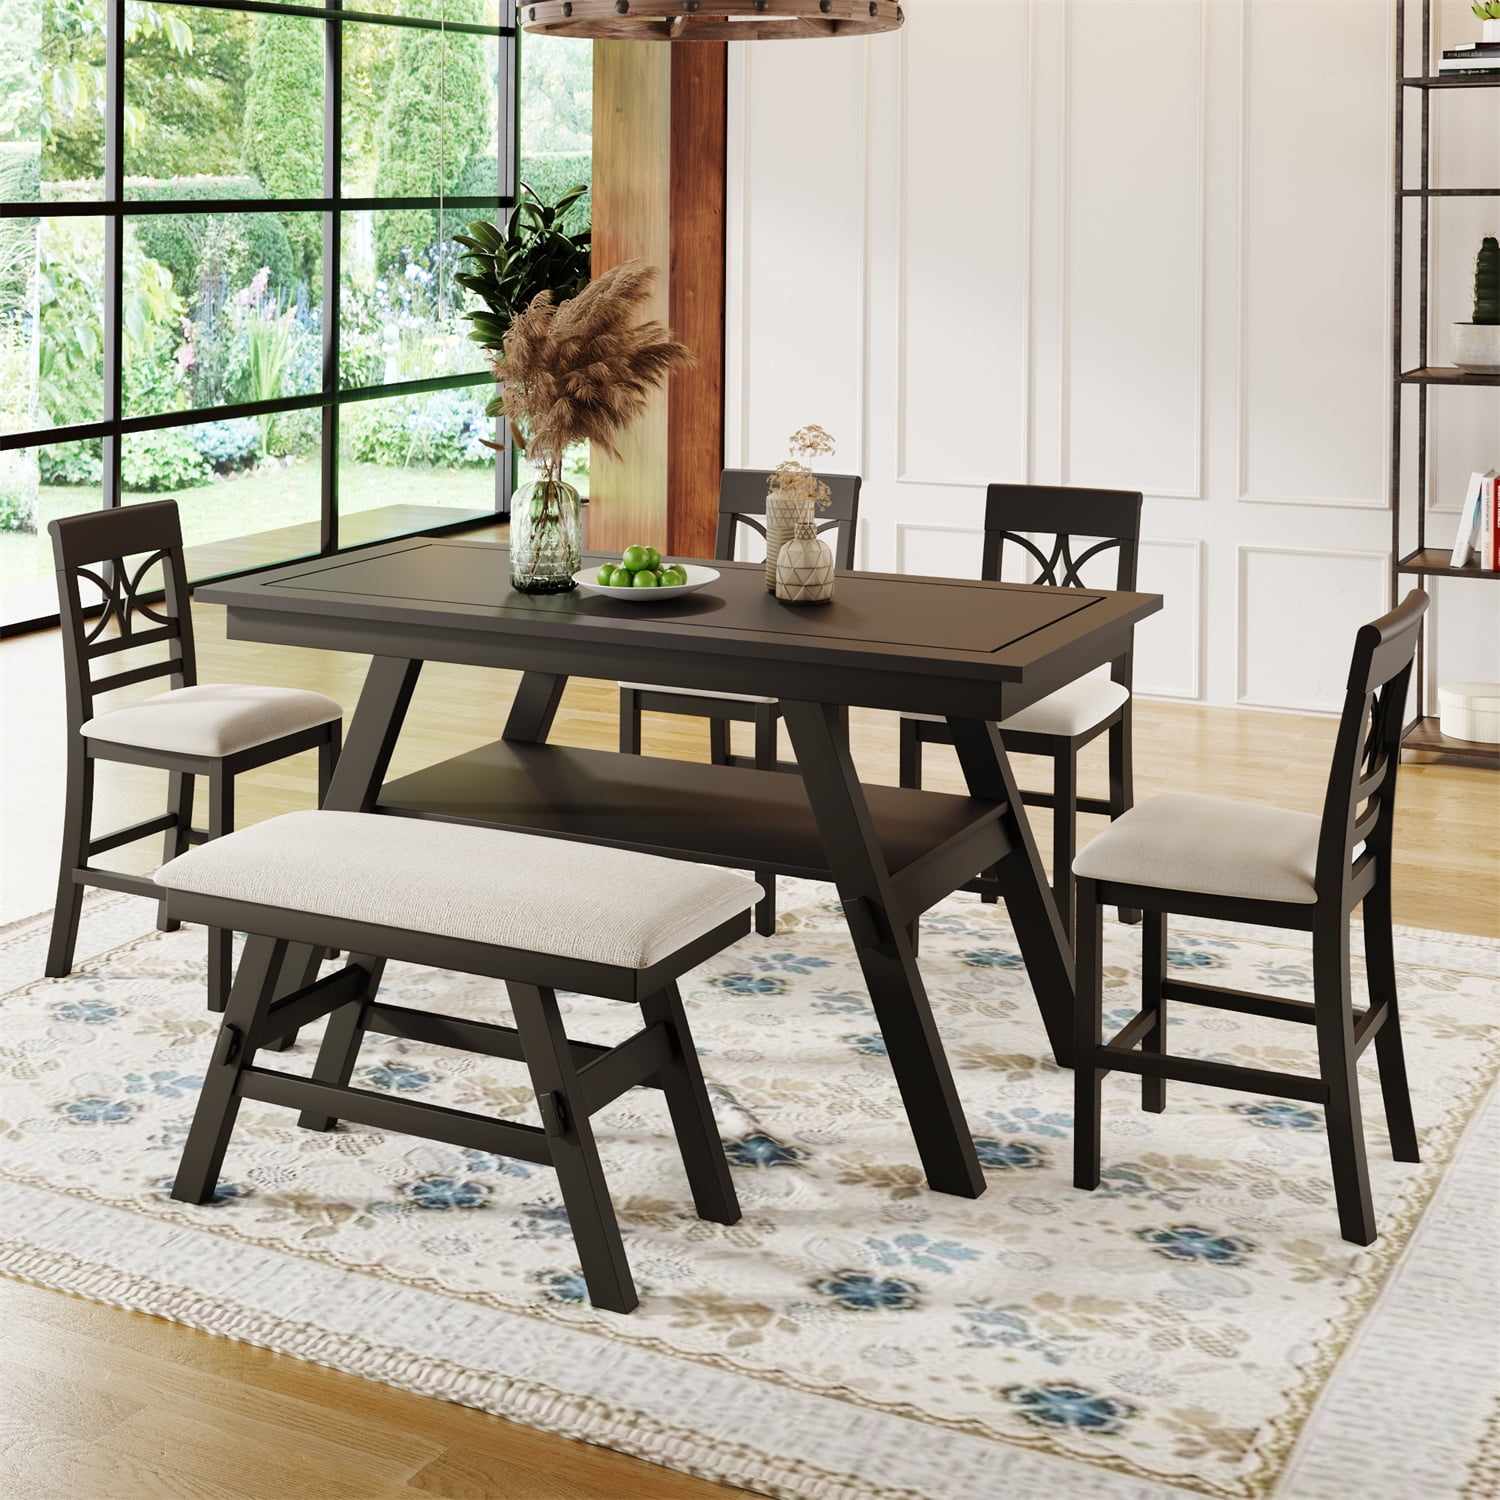 6-Piece Wood Counter Height Dining Table Set with Storage Shelf ...